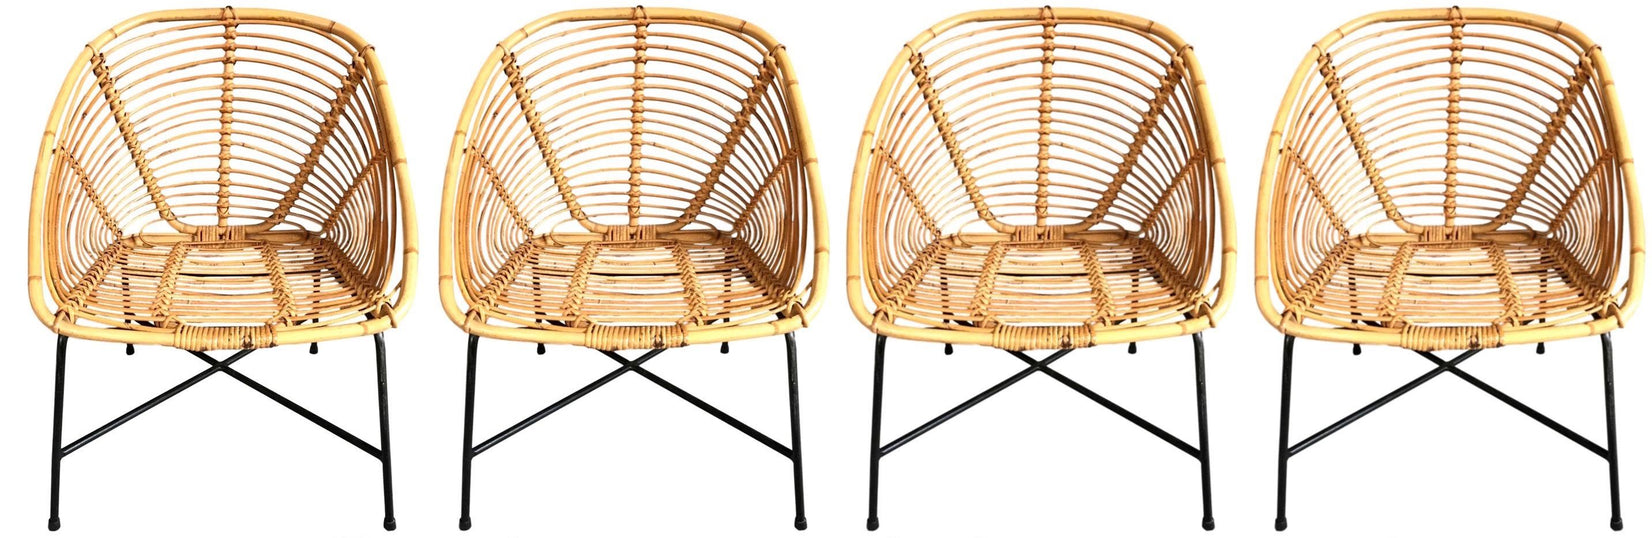 Set of Four Vintage French Wicker and Rattan Chairs, 1950s France